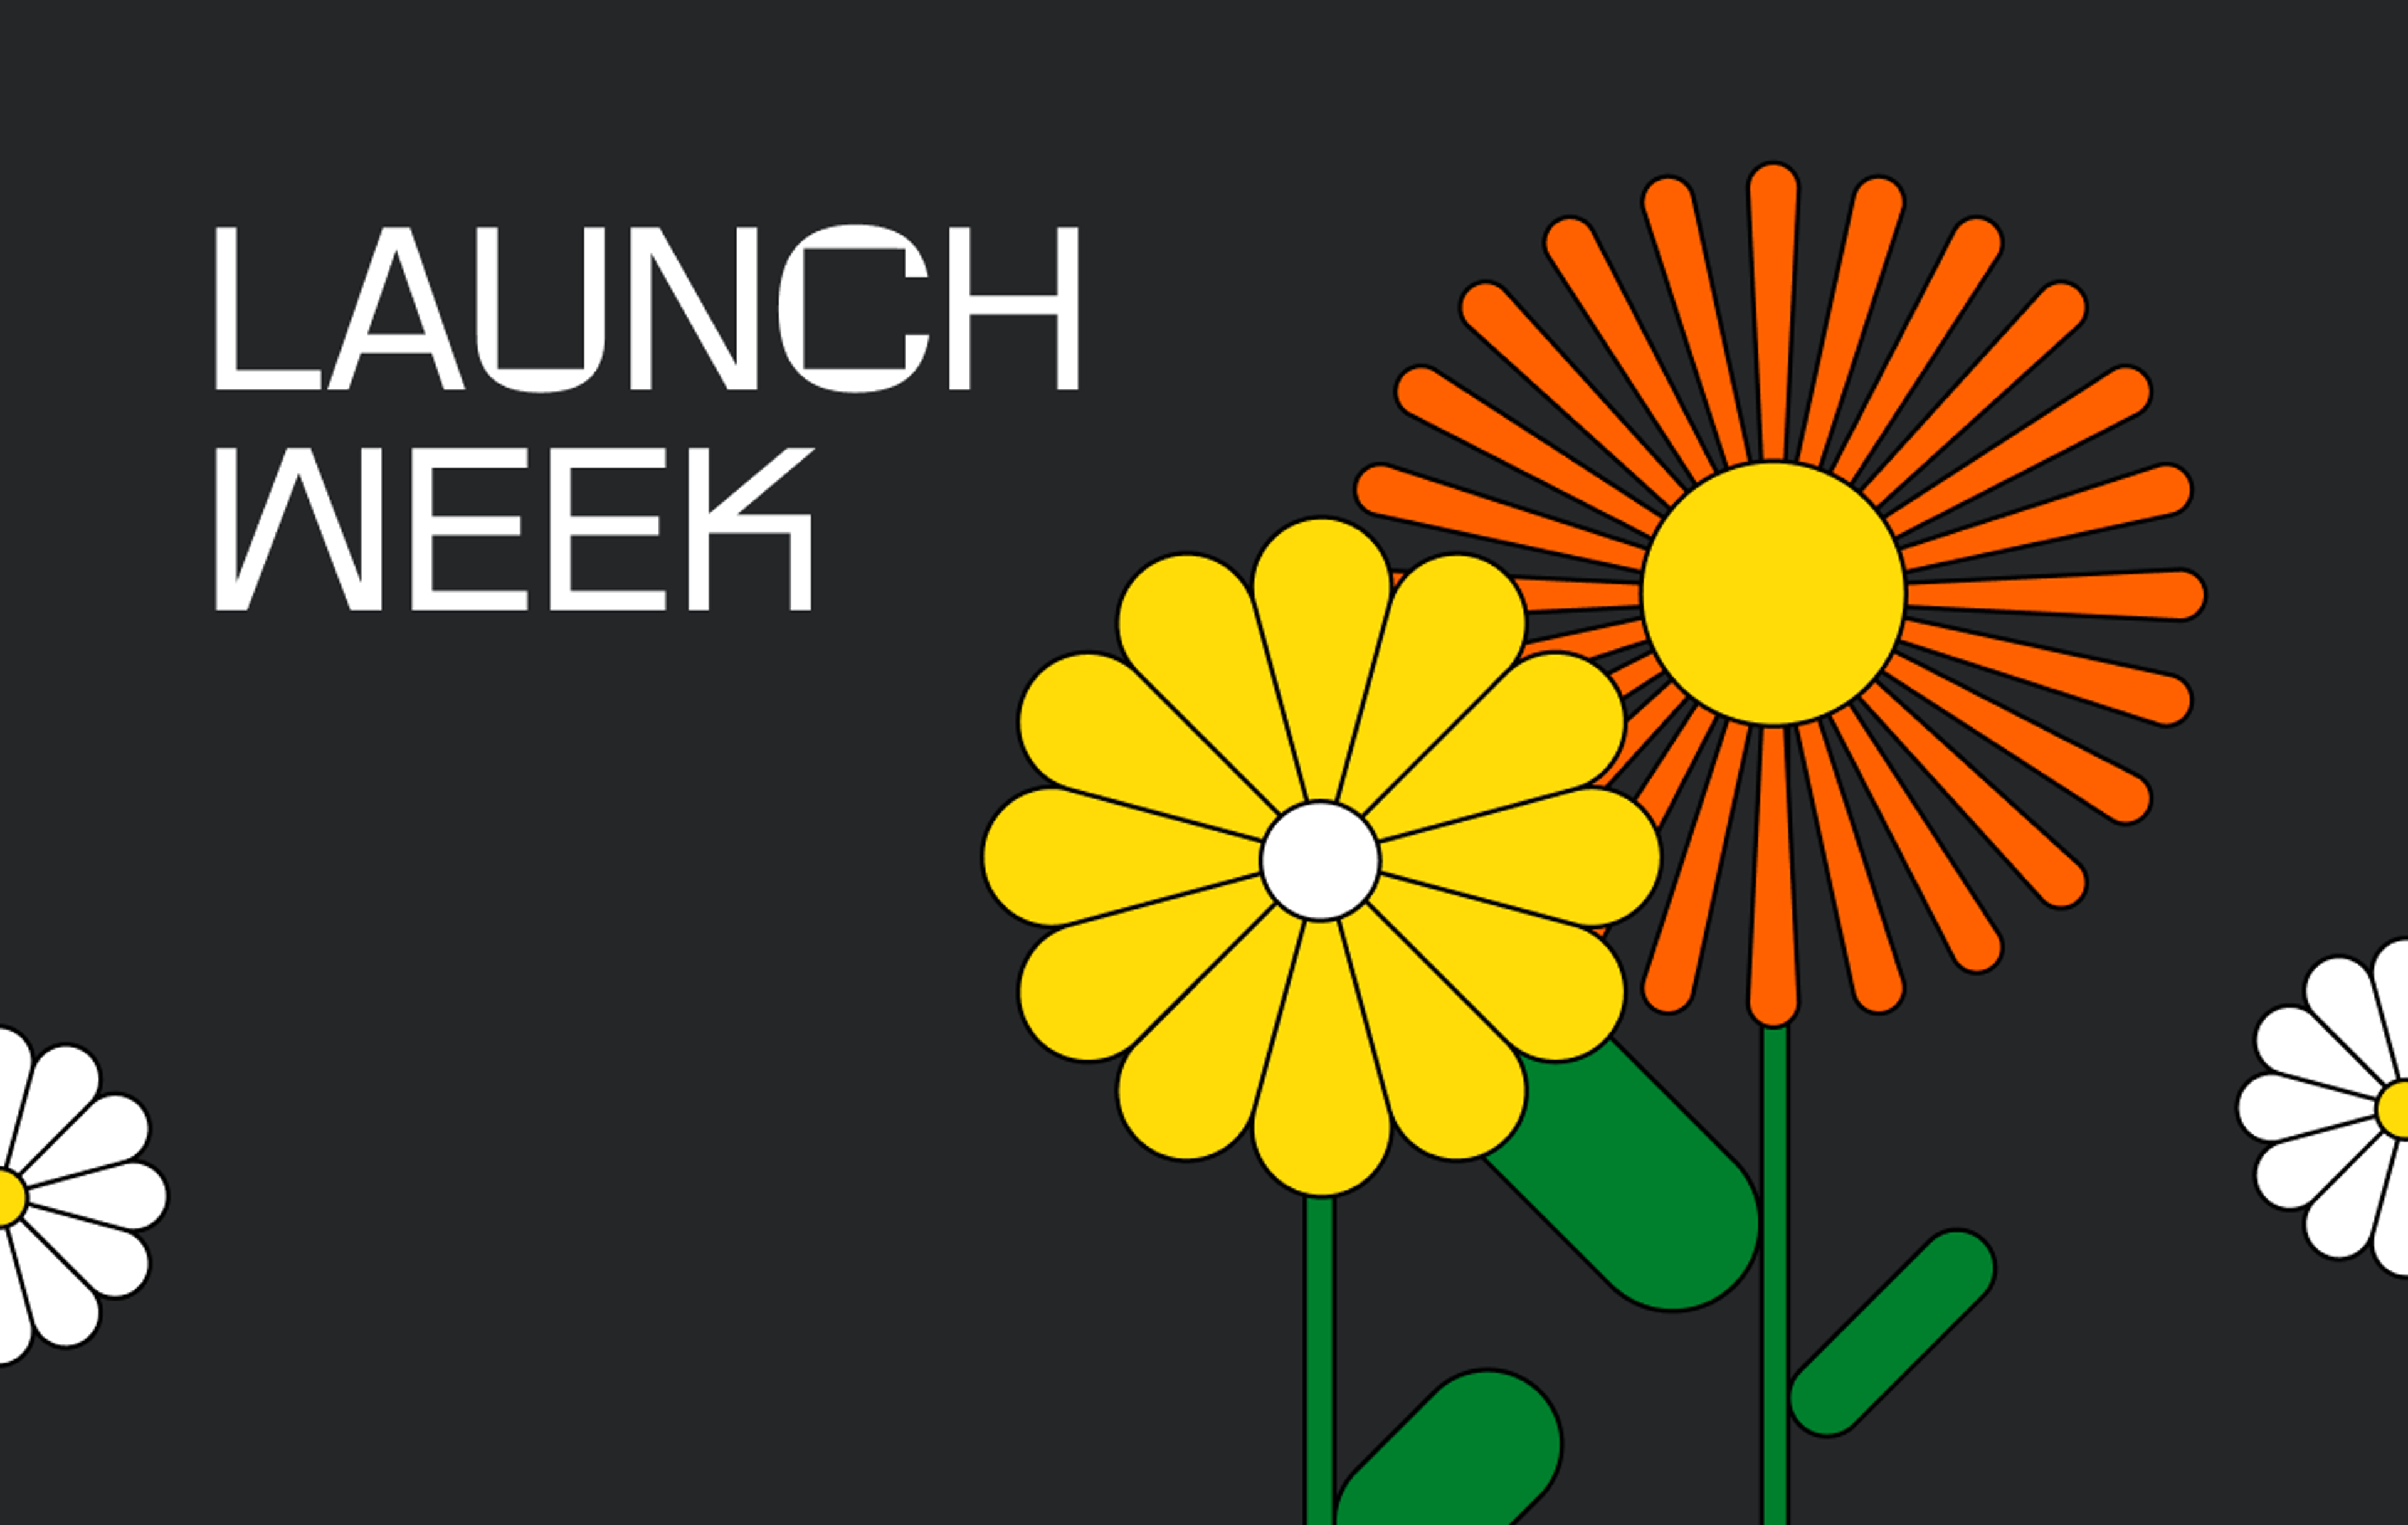 A graphic image with a black background featuring stylized flowers in bold colors, one in yellow and one in red, both with large circular centers. The text 'SPRING 2024 LAUNCH WEEK' is prominently displayed above the flowers. The Mux logo is displayed in the bottom left corner.